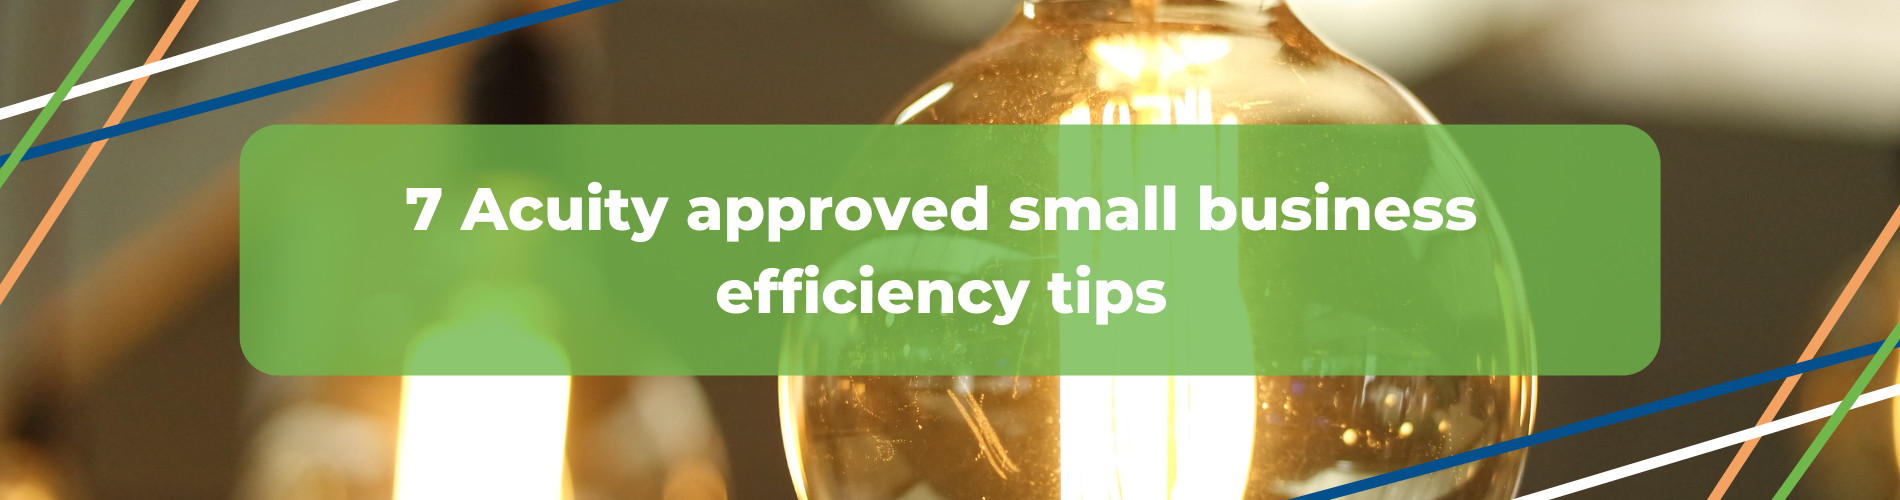 7 small business efficiency tips